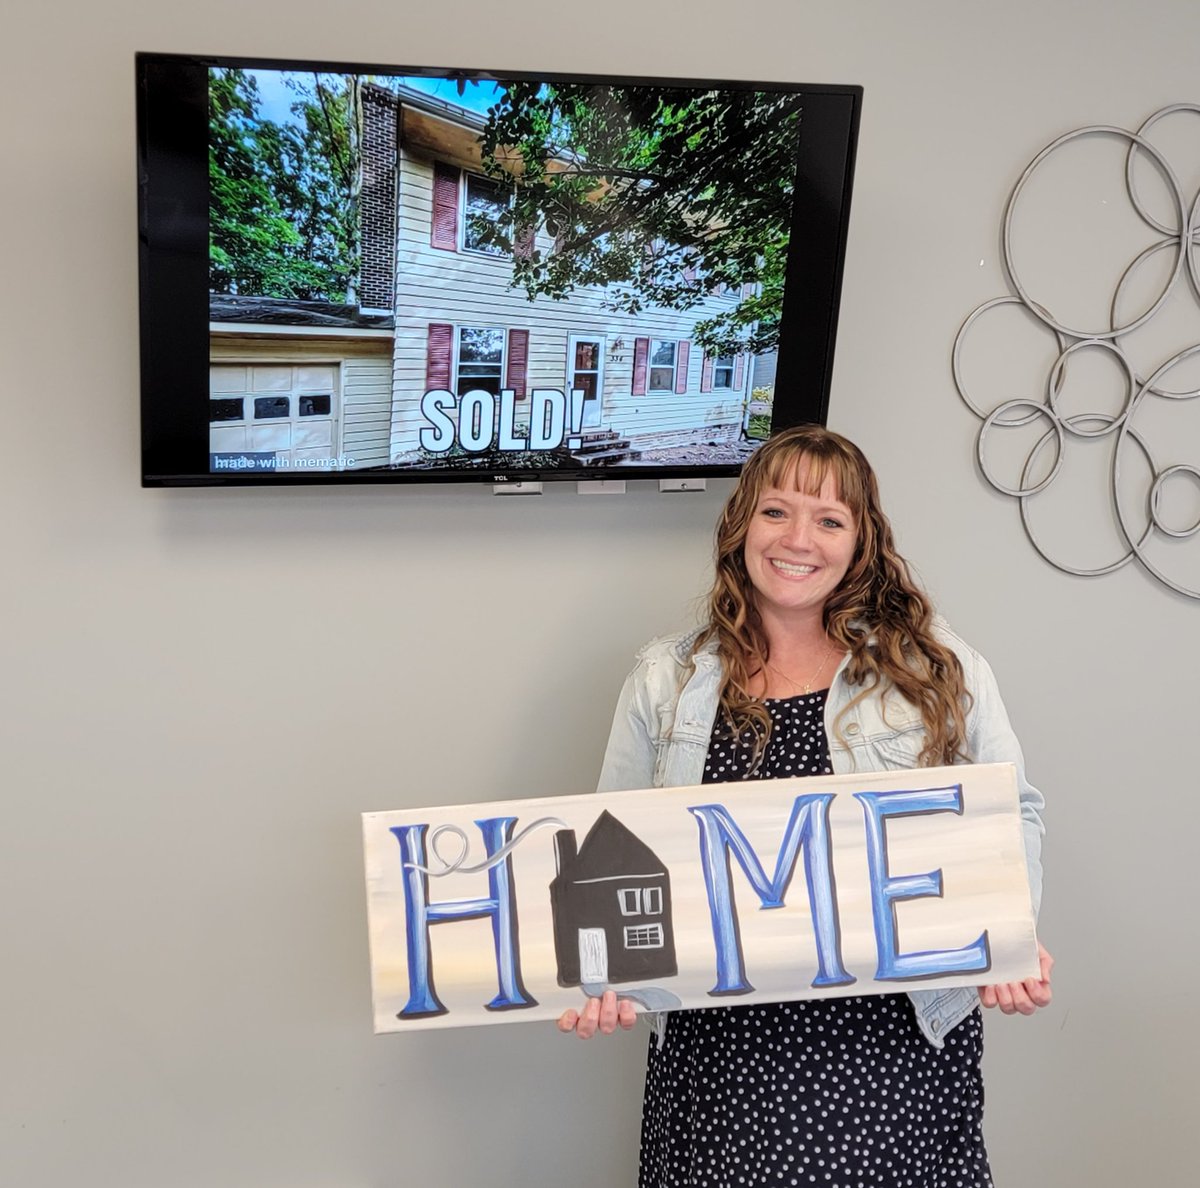 Albany Street is officially *SOLD* !  

This one has been bittersweet. May the next chapters in life be blessed for all invoved. 

#Alliedhomequest #merrycozyattheheartofmore #yourfriendandrealtor #marycamusorealtor #newchapter #sold2022 #listingagentfxbg #exprealty